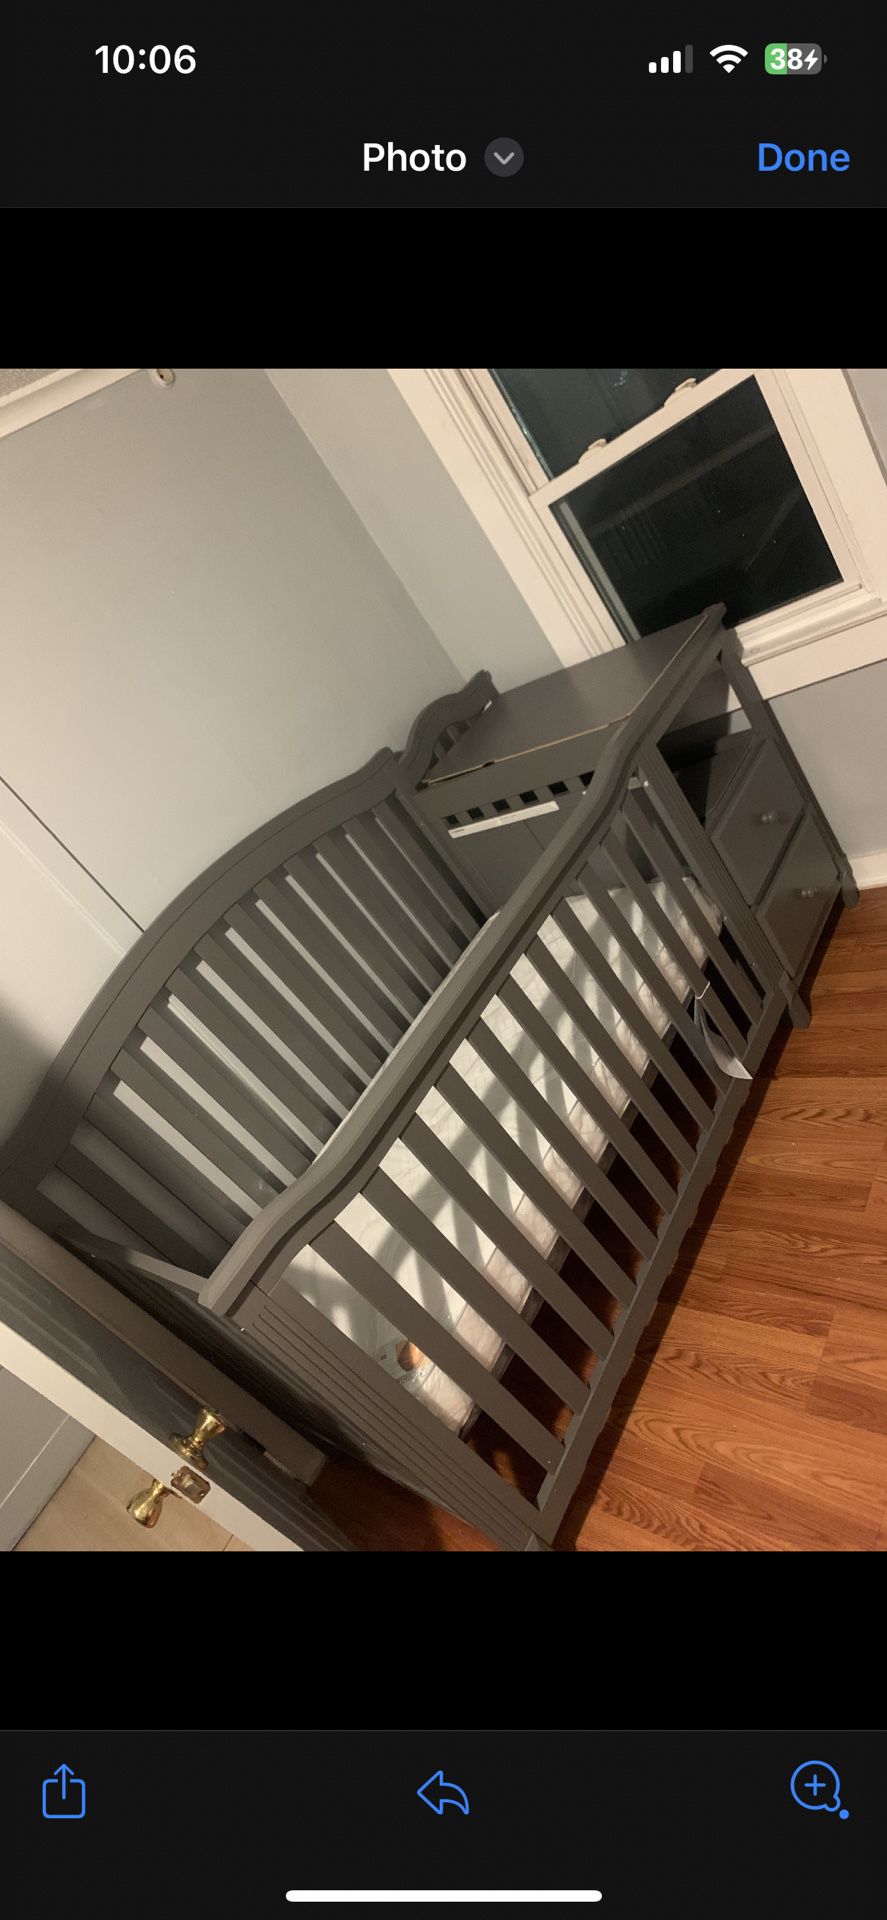 Baby Crib With Changing Table 